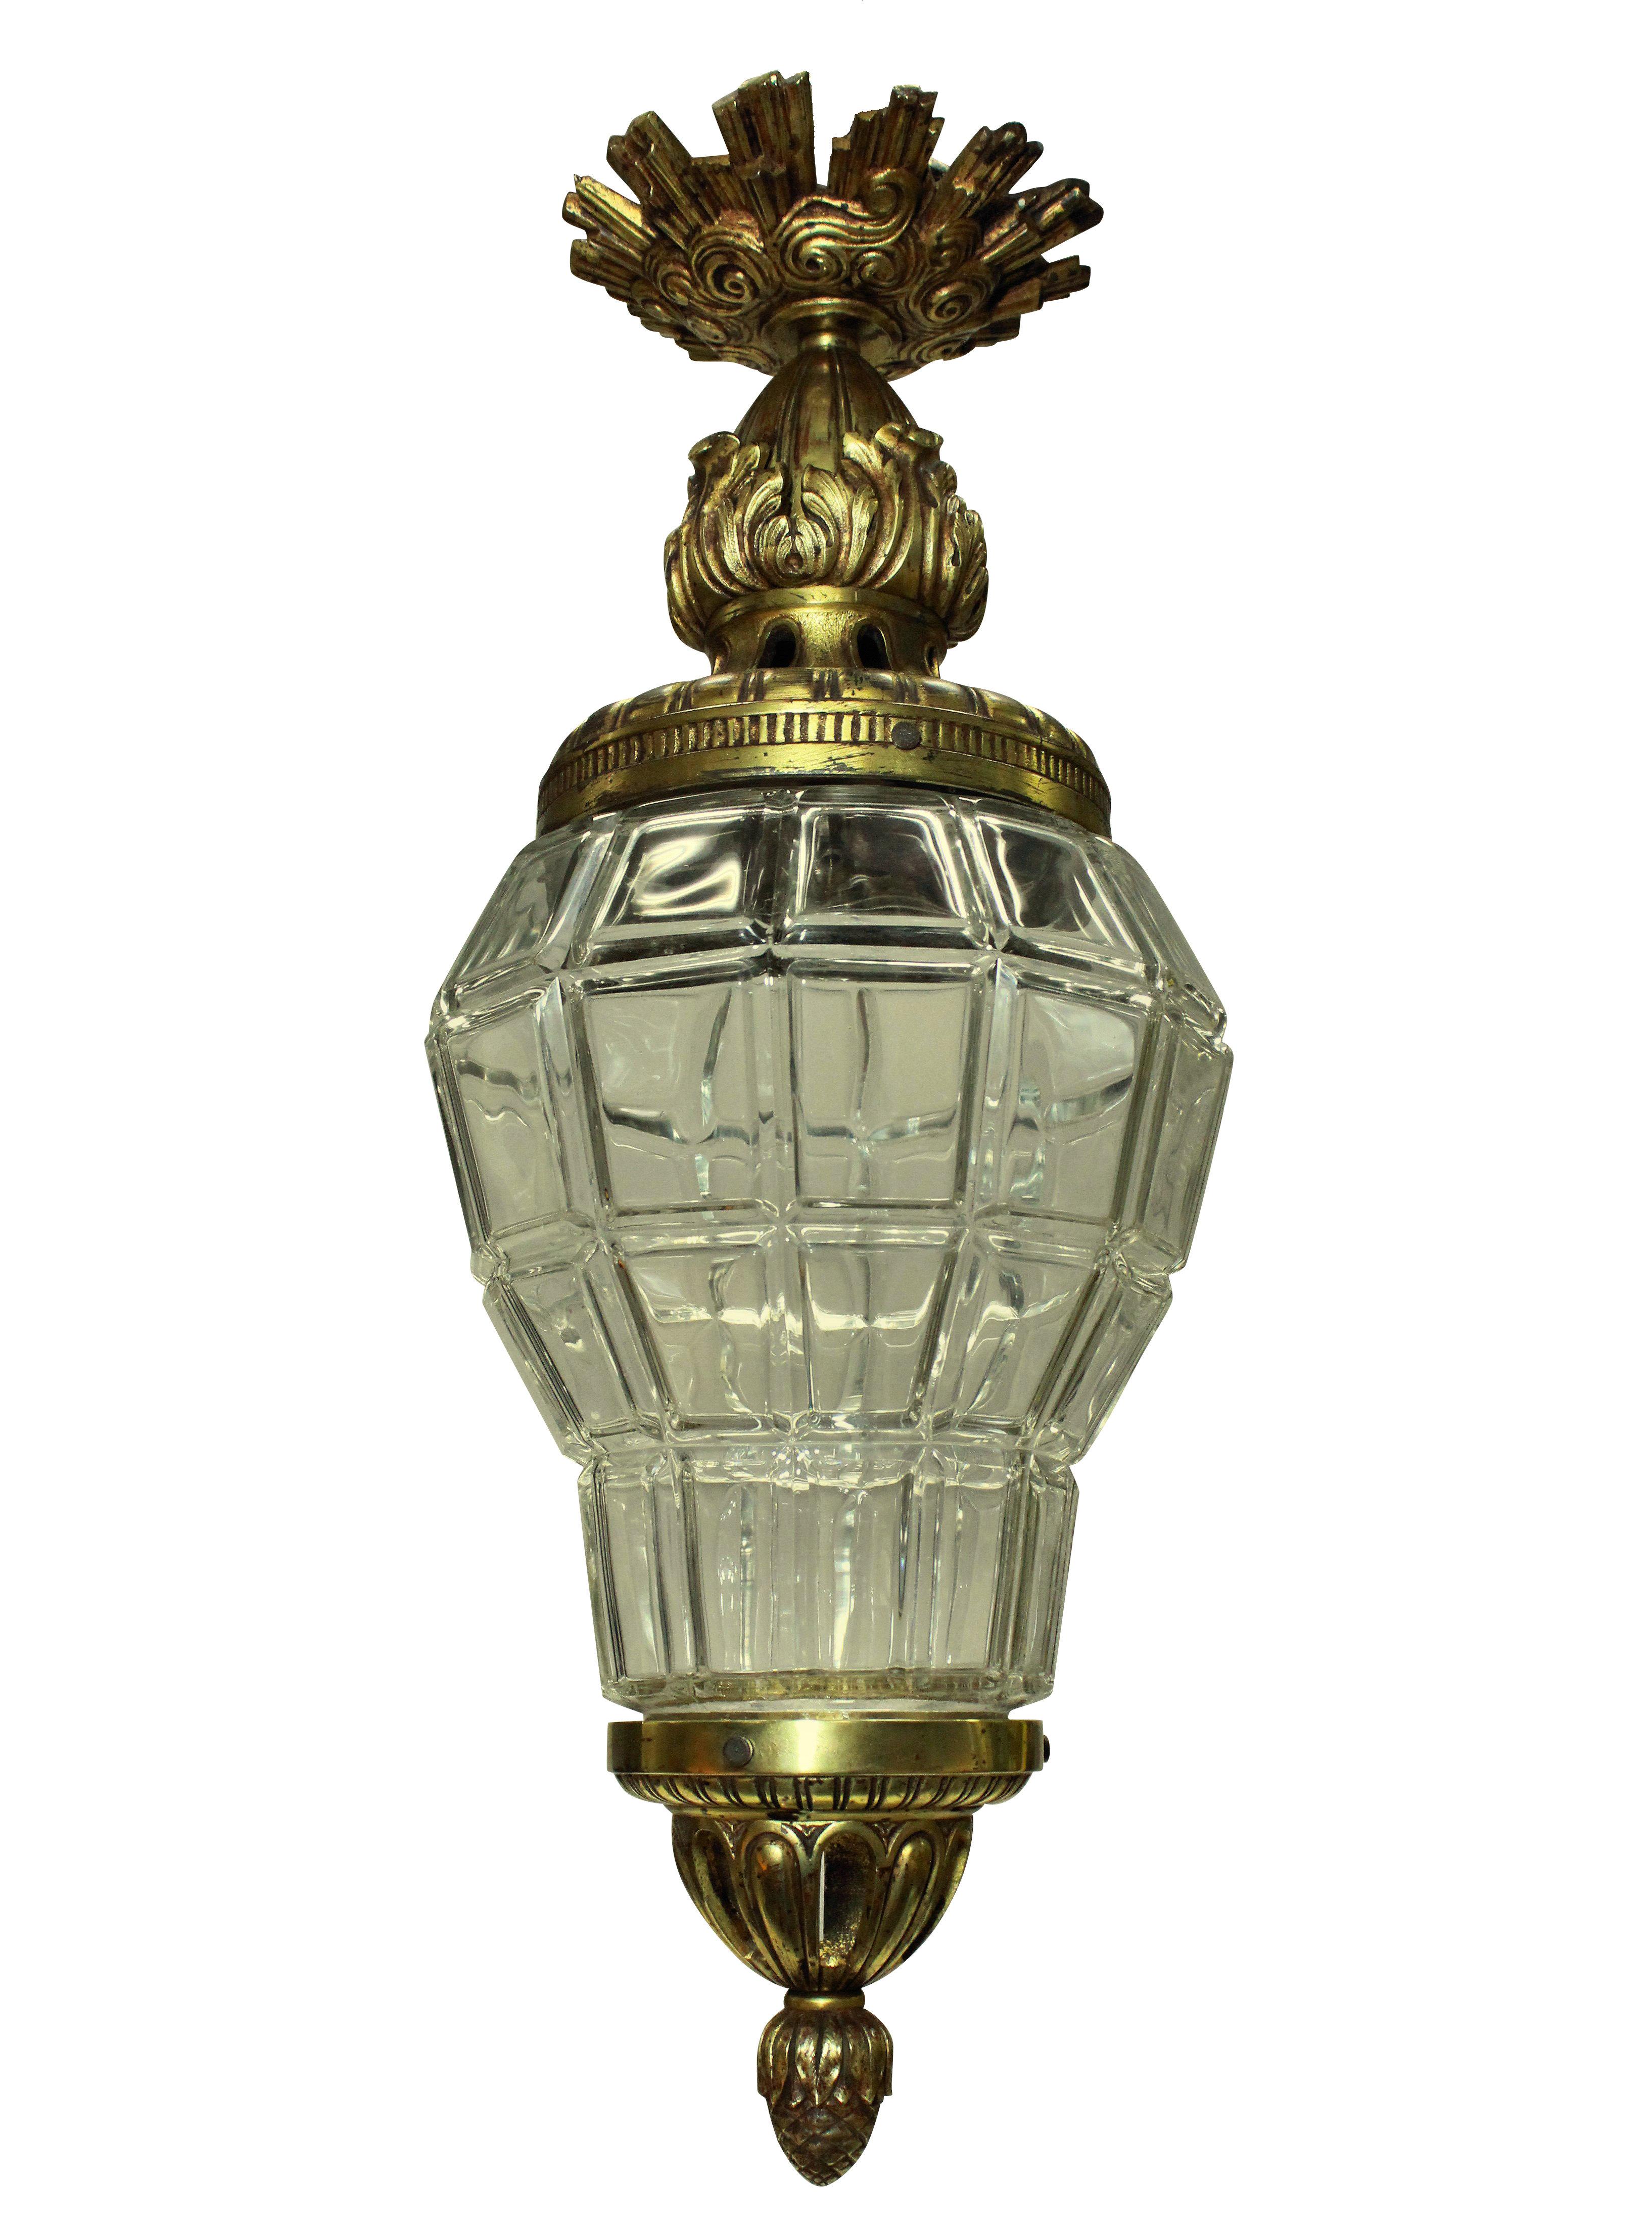 A French gilt bronze and glass lantern, modelled on the lanterns at Versailles, the canopy having sun rays.